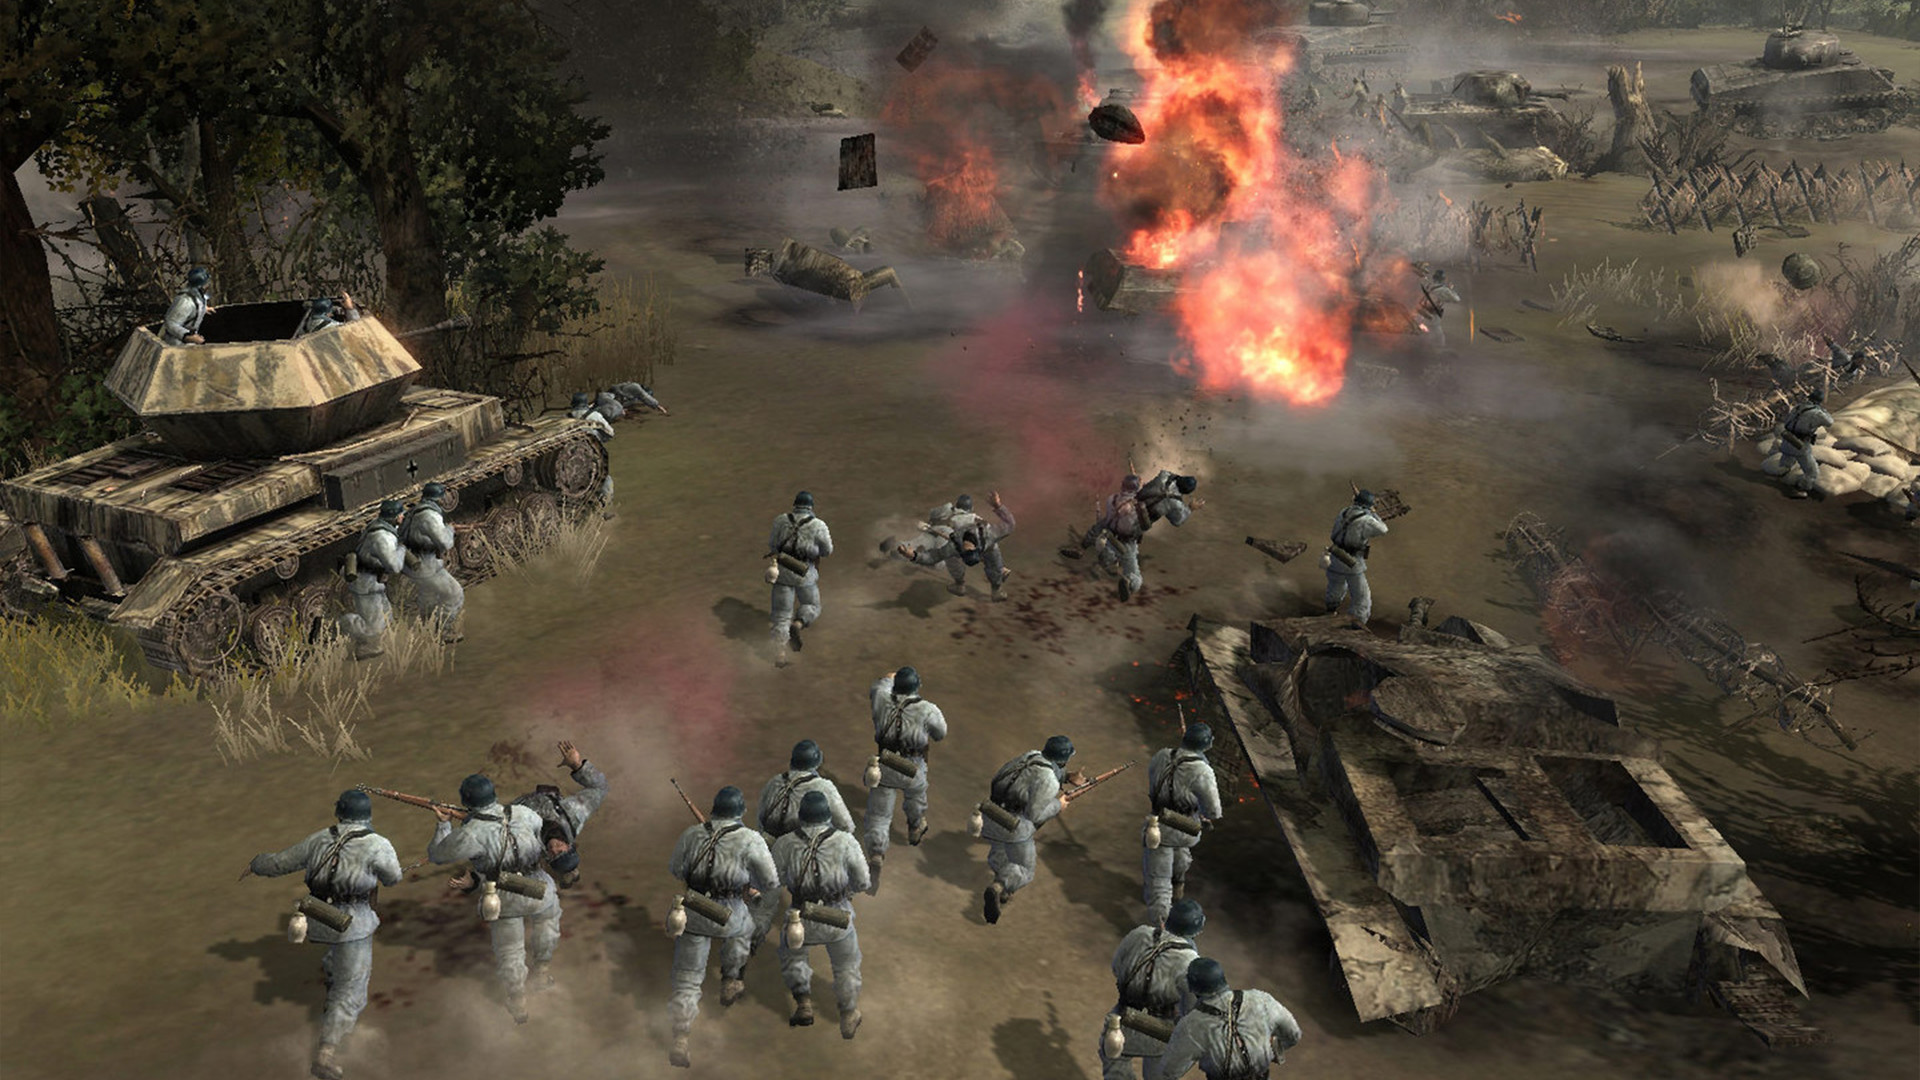 Best mobile war games: Company of Heroes. Image shows a group of soldiers rushing into no-man